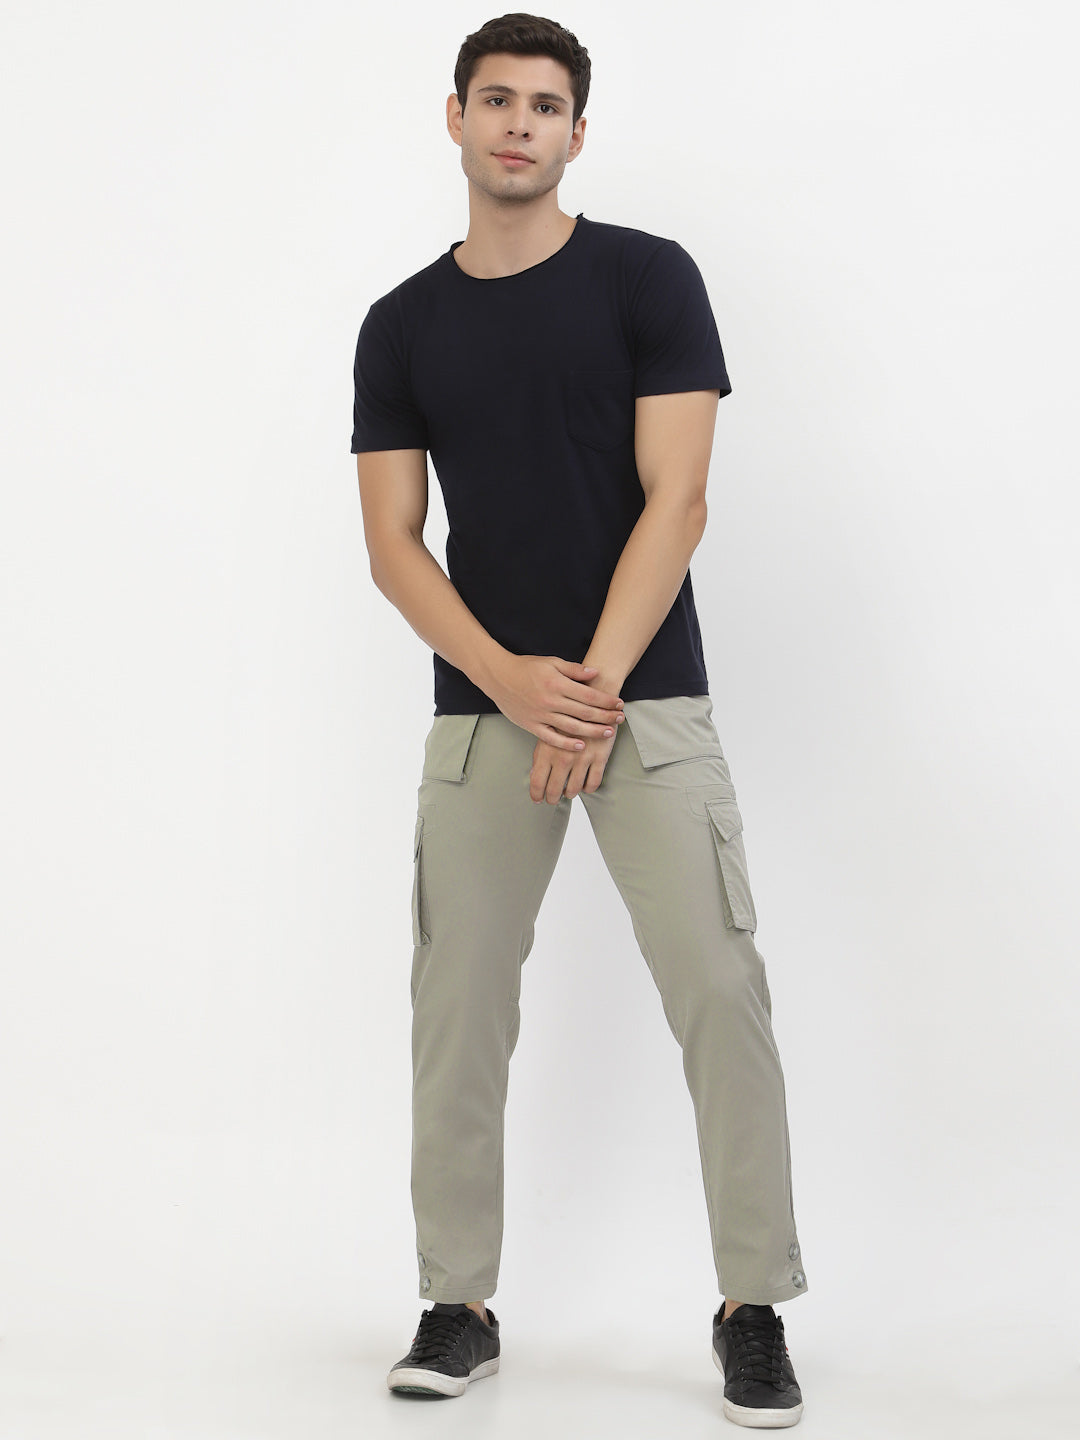 SLOUCHY CARGO PANTS